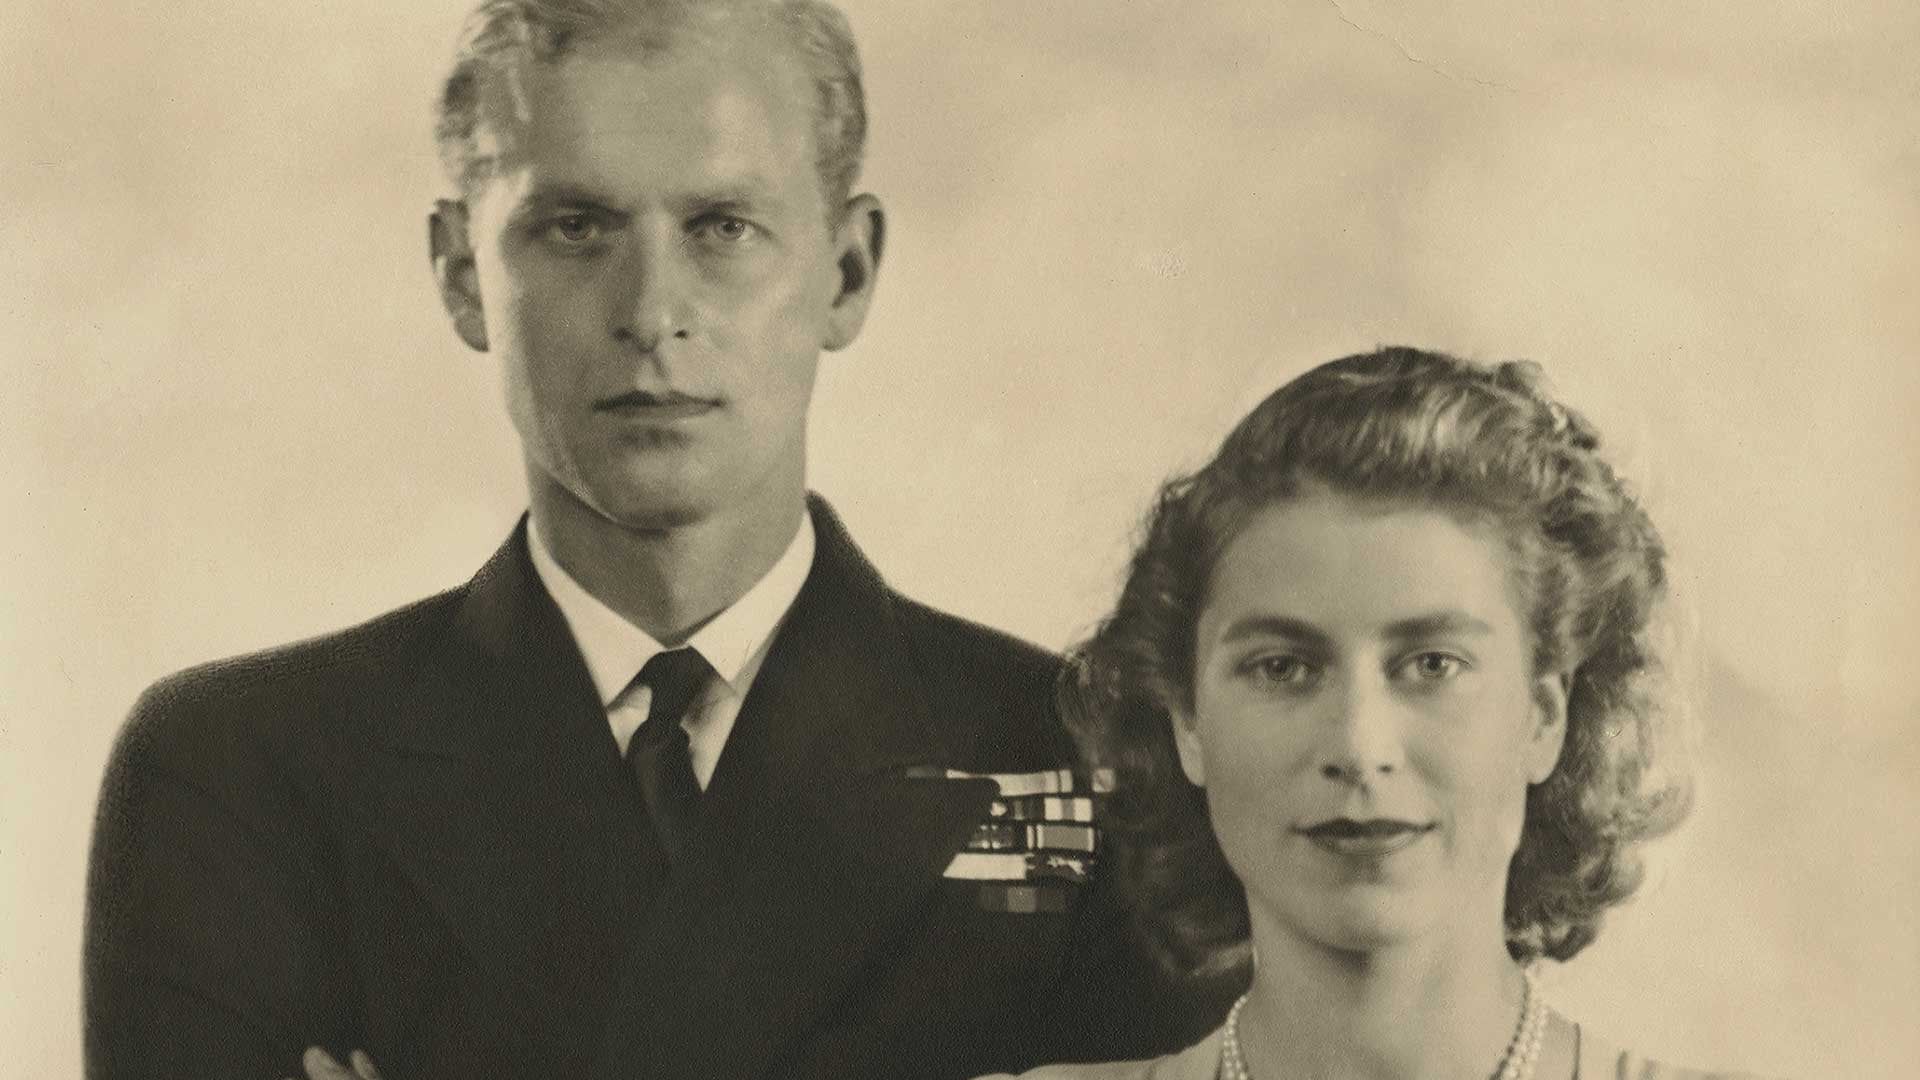 Prince Philip: The Plot to Make a King Backdrop